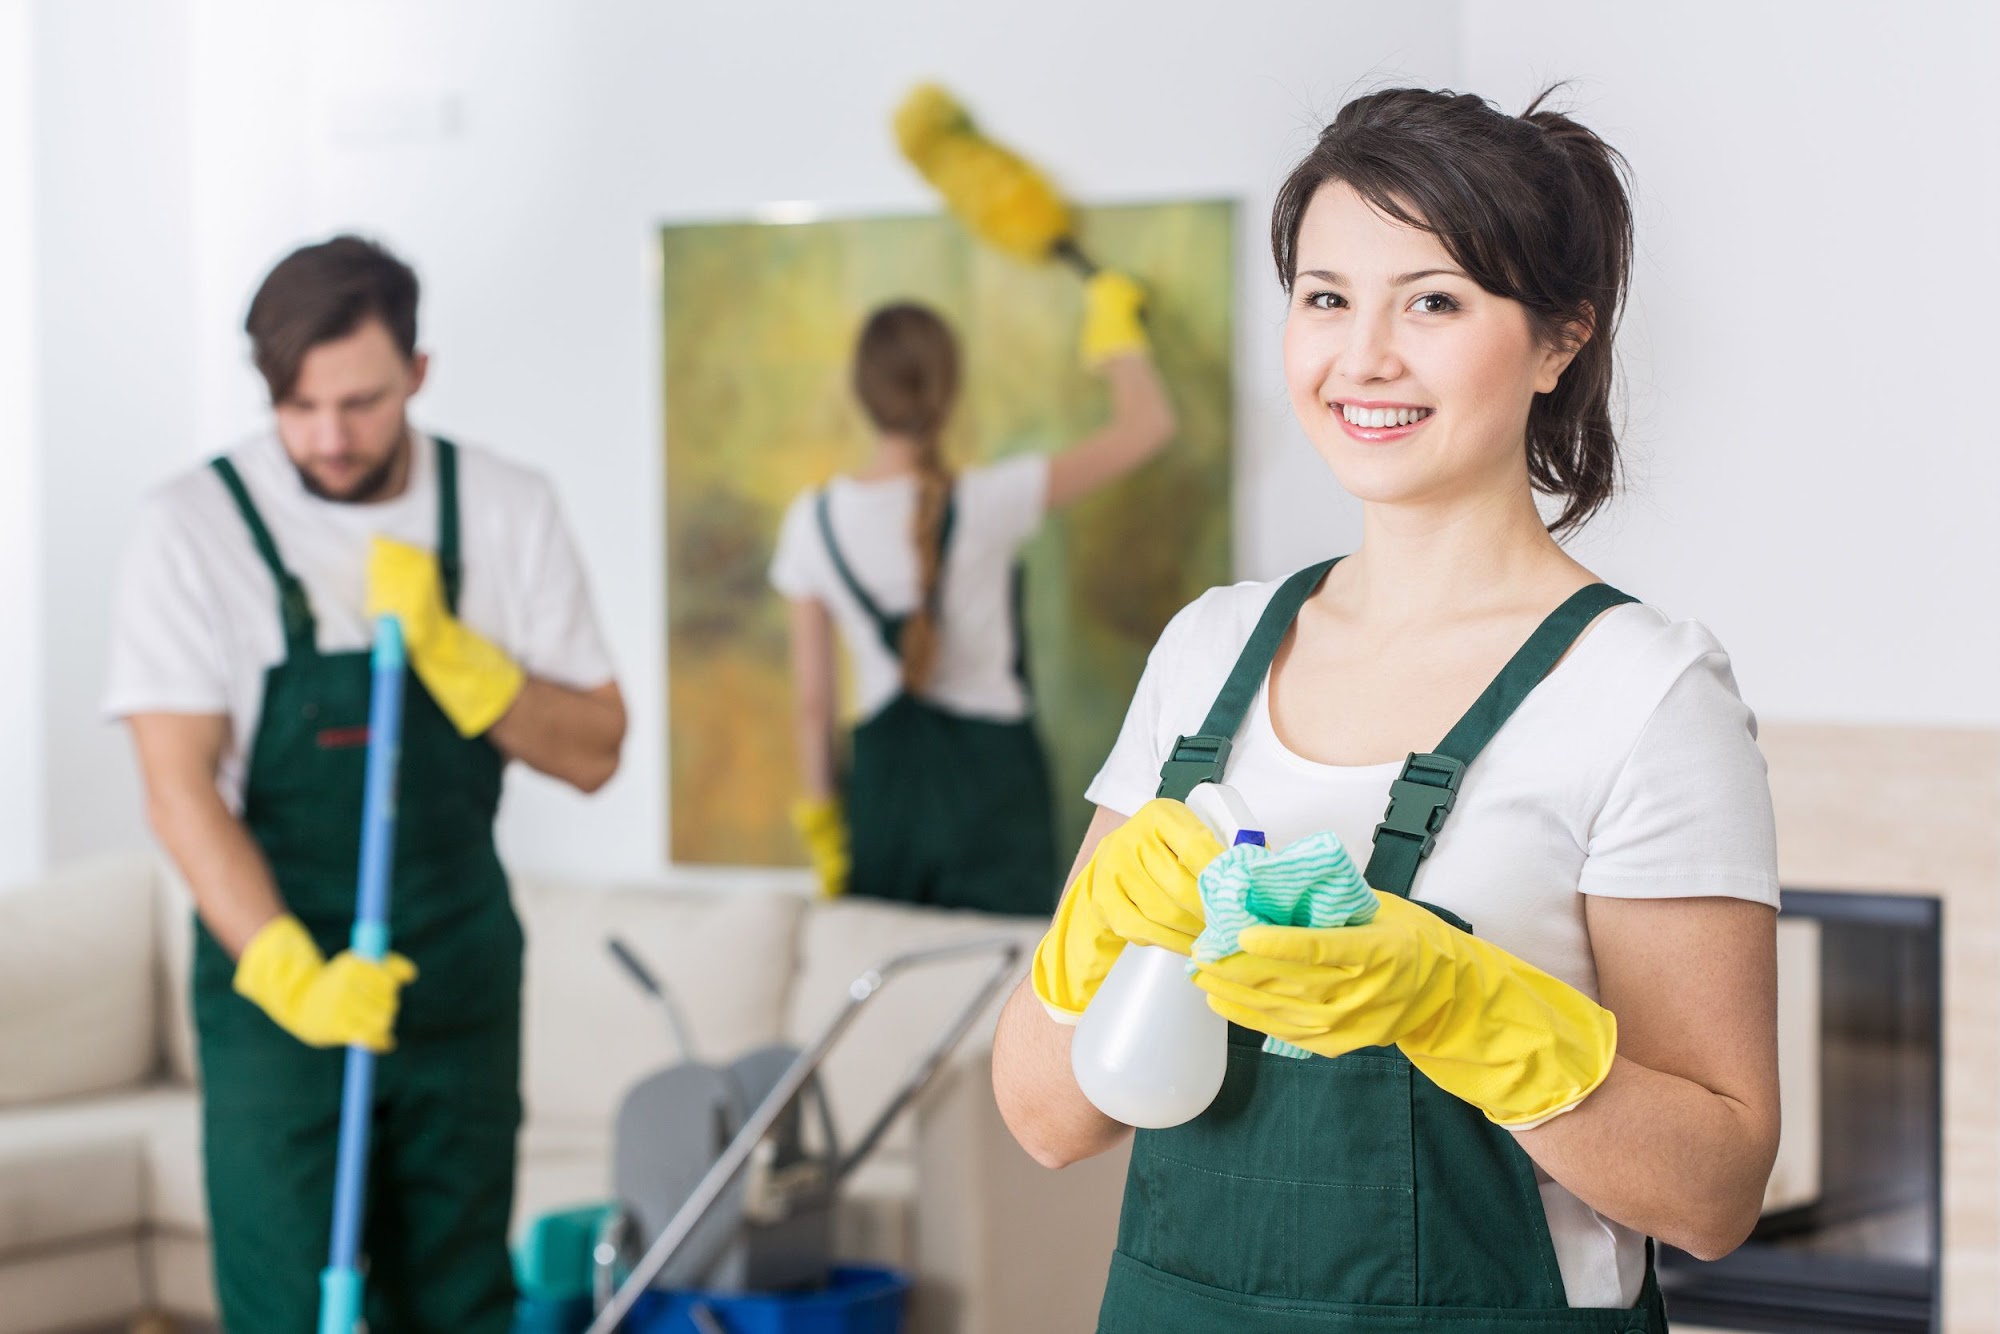 Frisco Brothers Janitorial Services